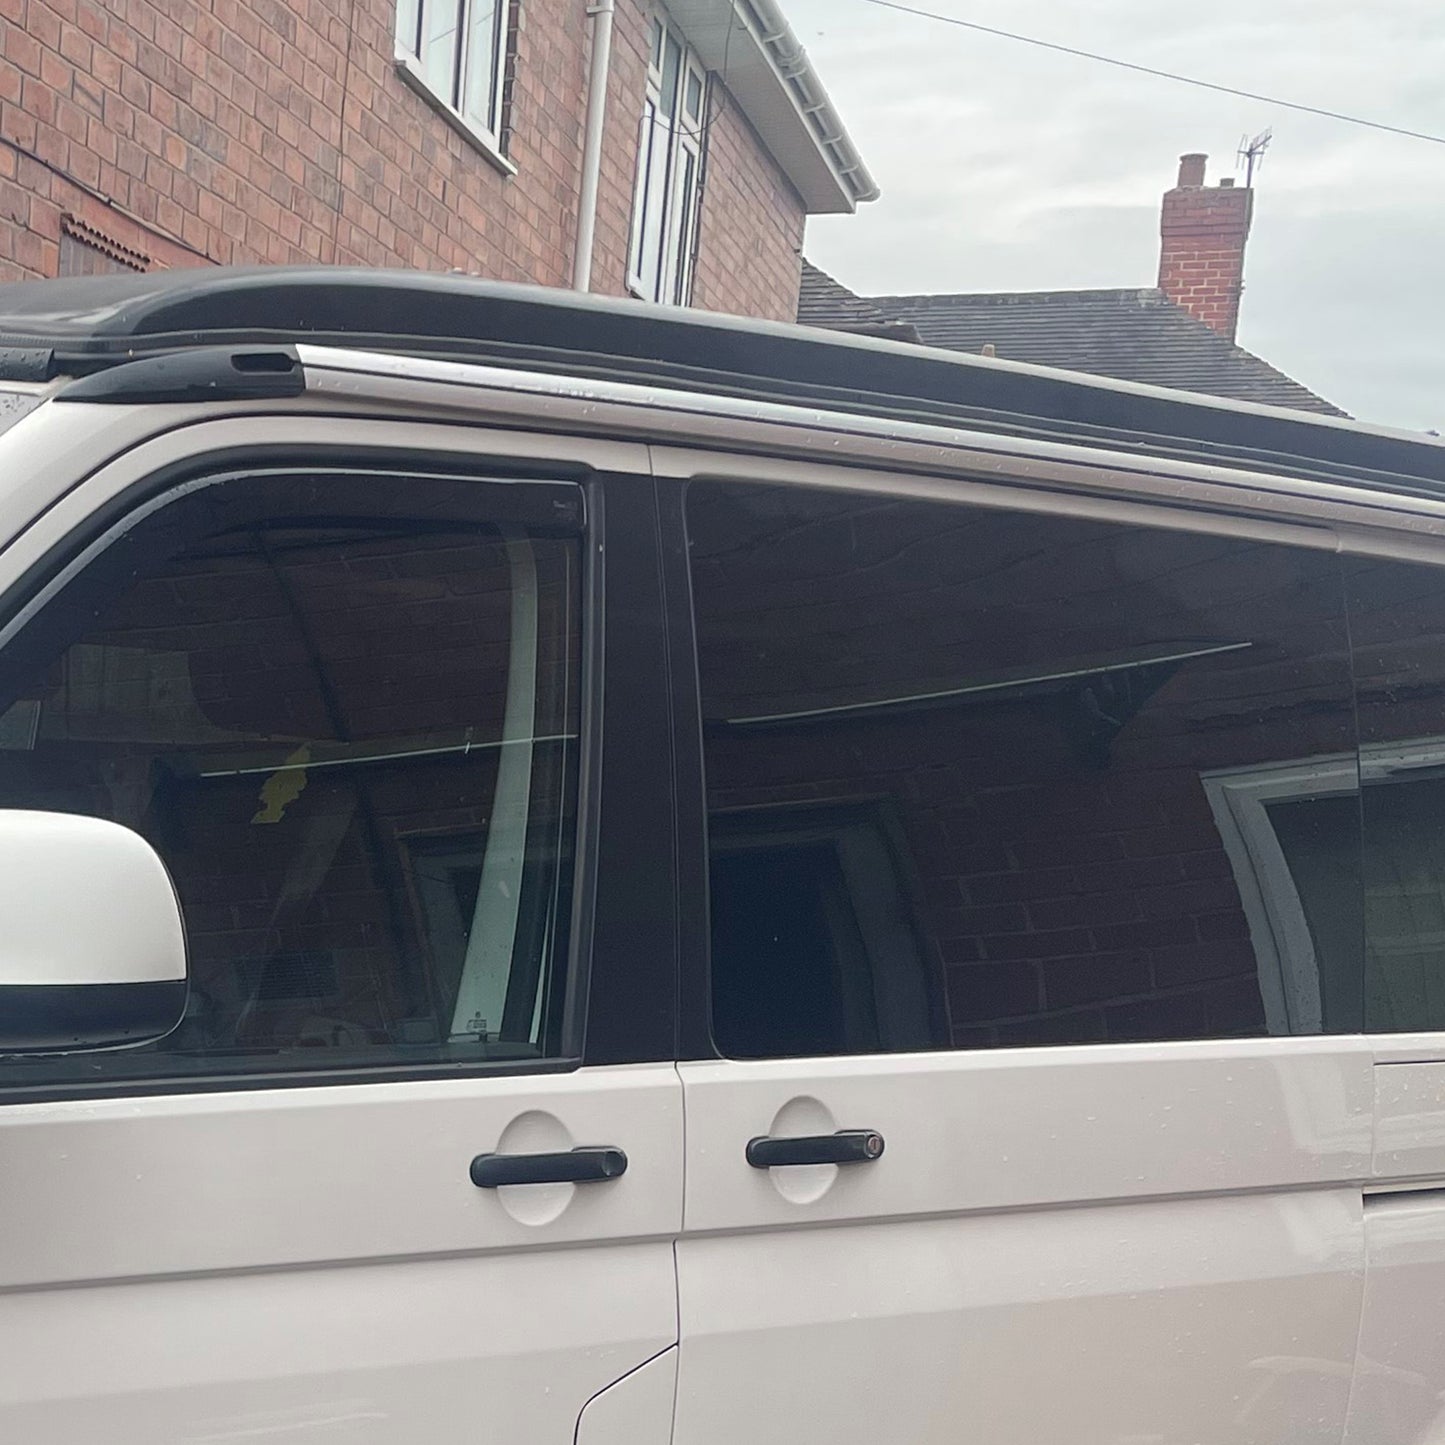 VW T5.1 Awning Rails (Anodised Silver) Ideal for Campervan Drive-Through Awning, Compatible with Reimo Awning